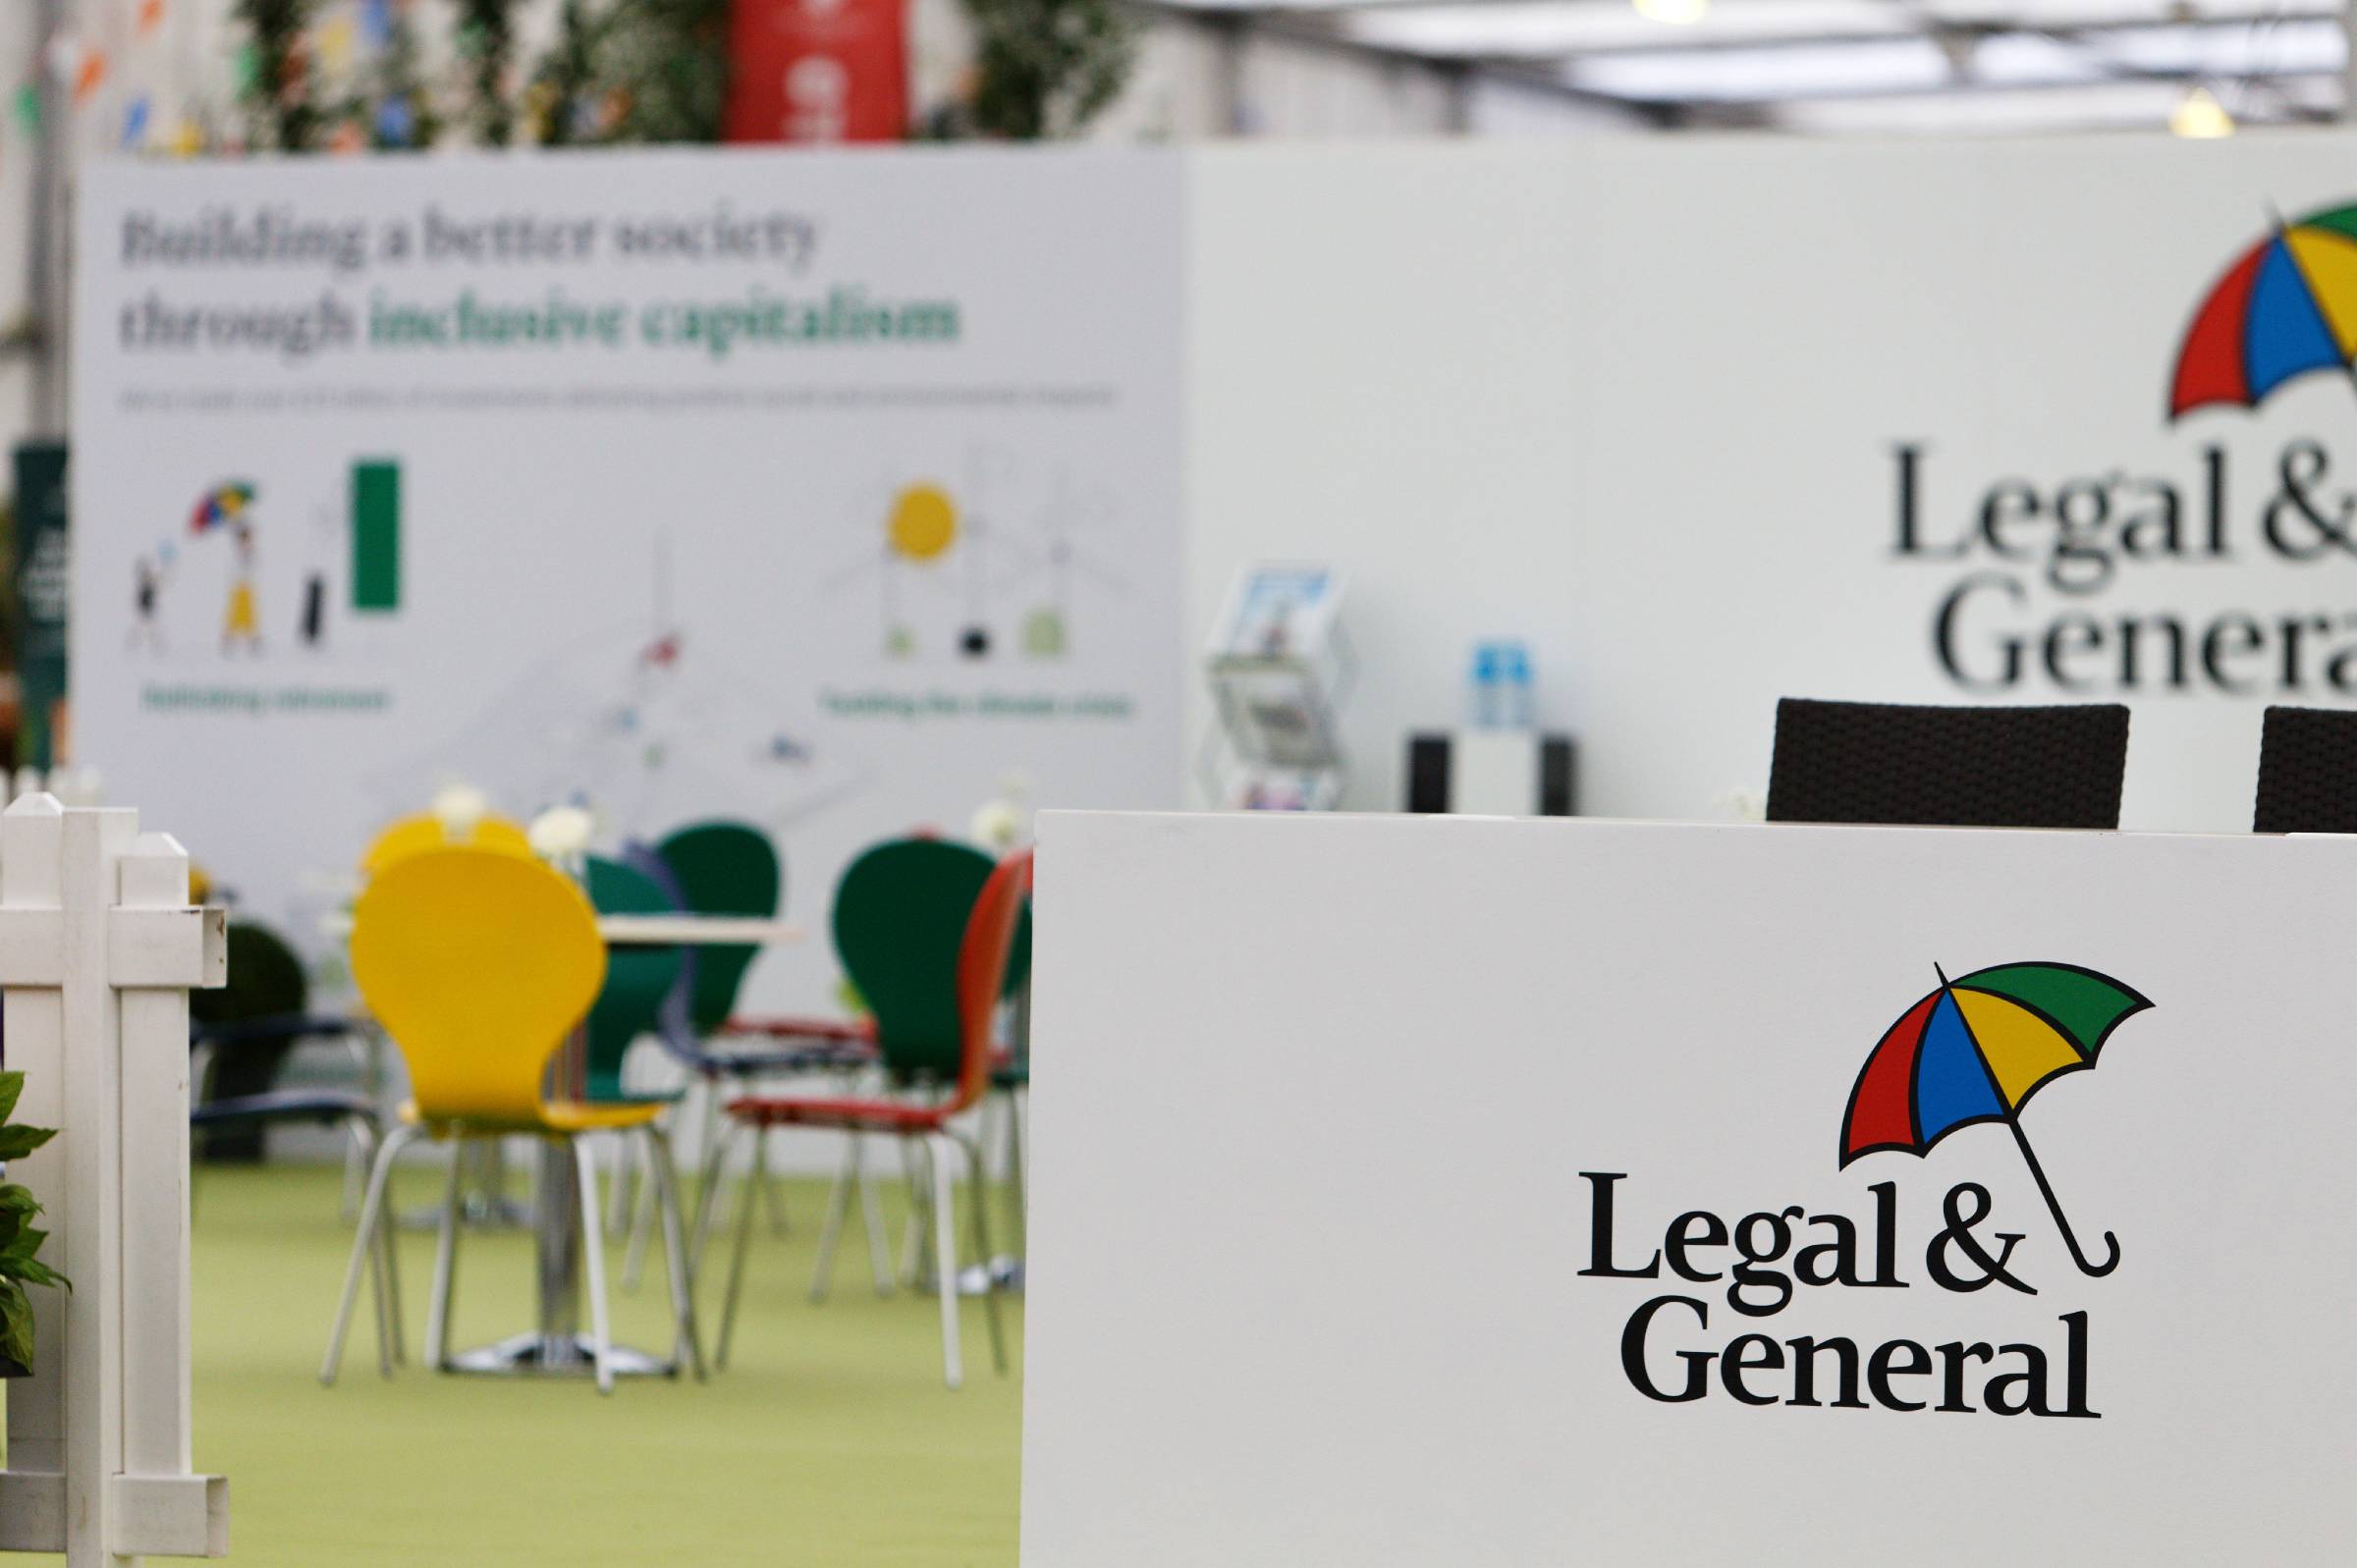 Exclusive lounge area with Legal & General branding